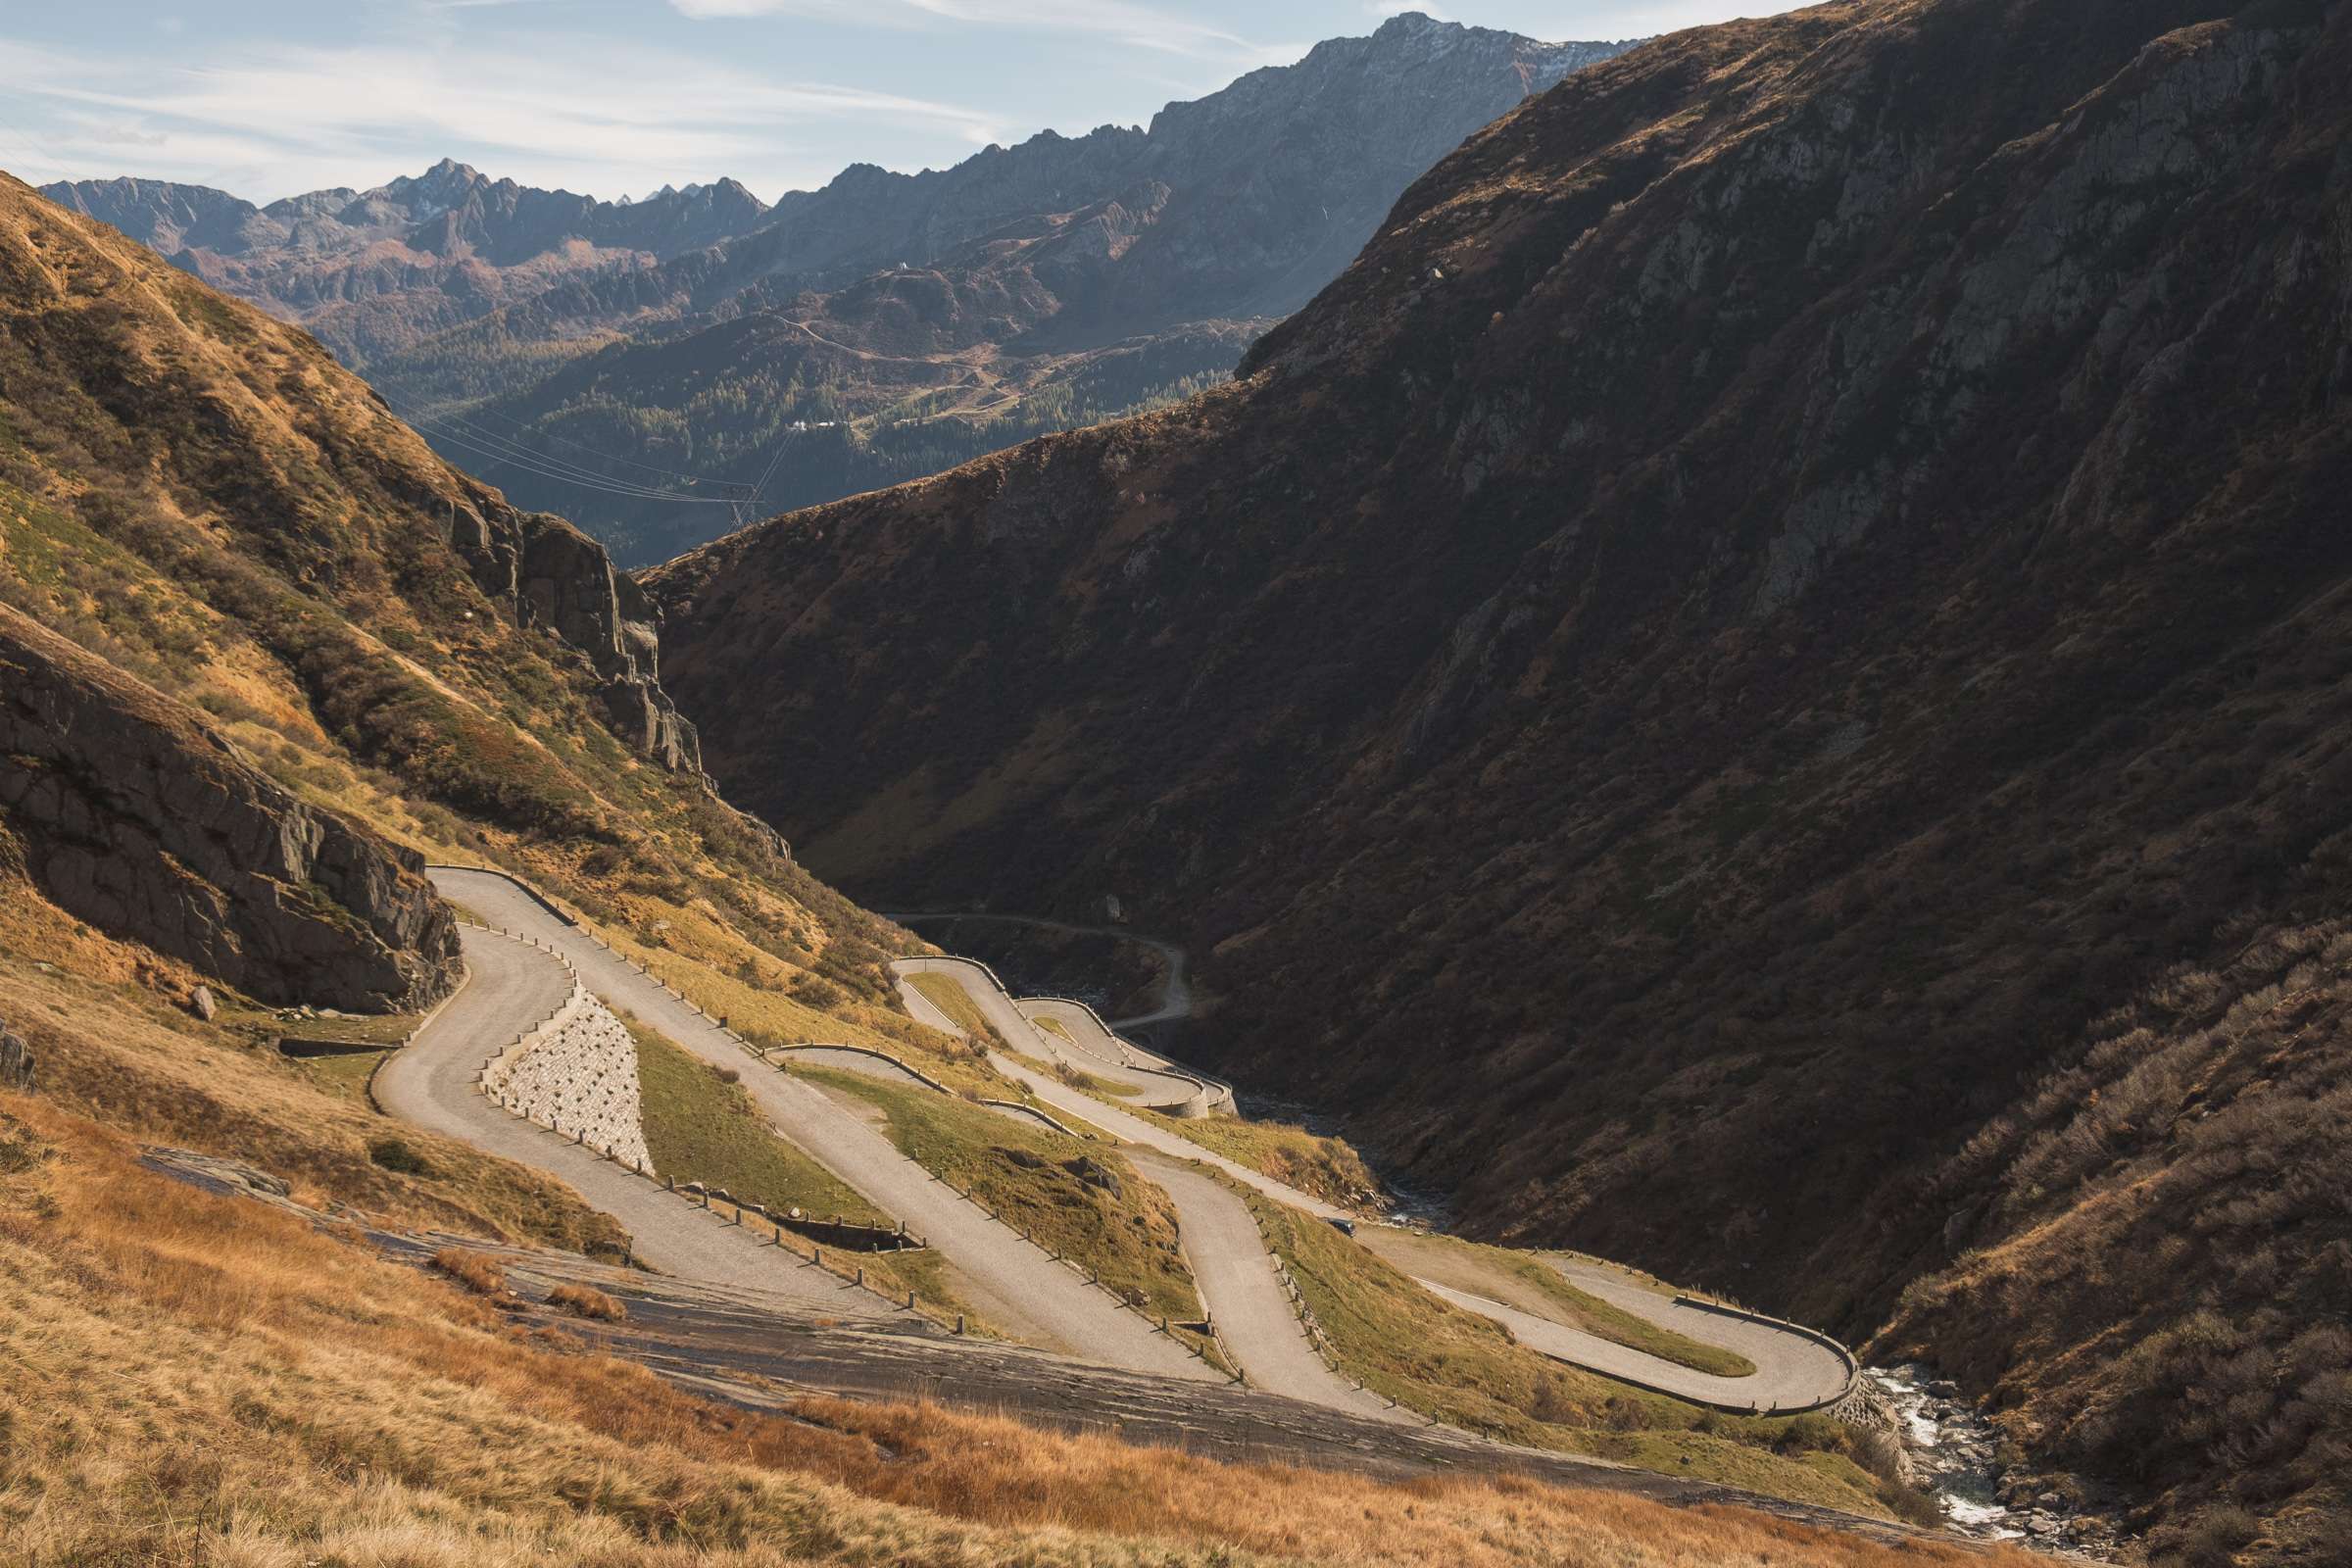 A bendy old road on Gotthard Pass. Typical of mountain passes in Switzerland